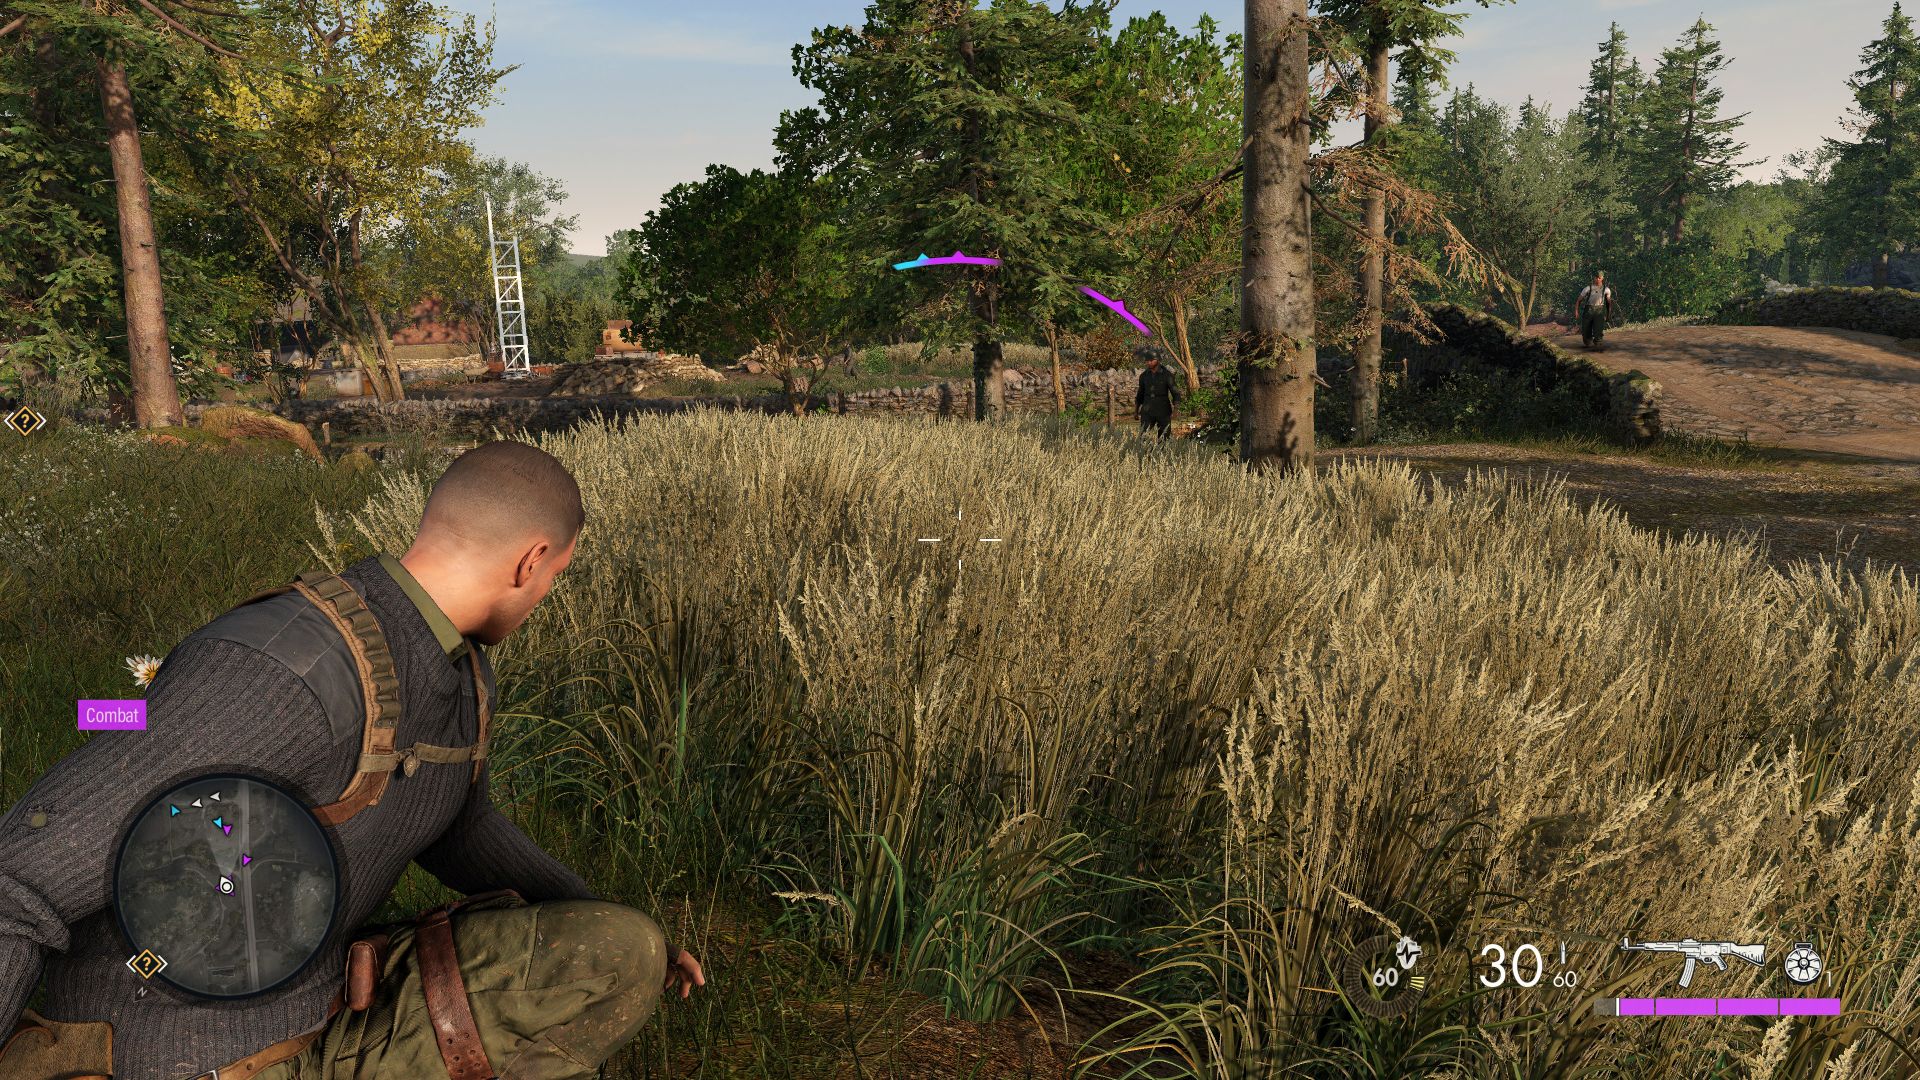 Karl is crouched in a country scene, there are some enemies ahead. The HUD has awareness markers for enemies who have noticed Karl, in blue and purple.